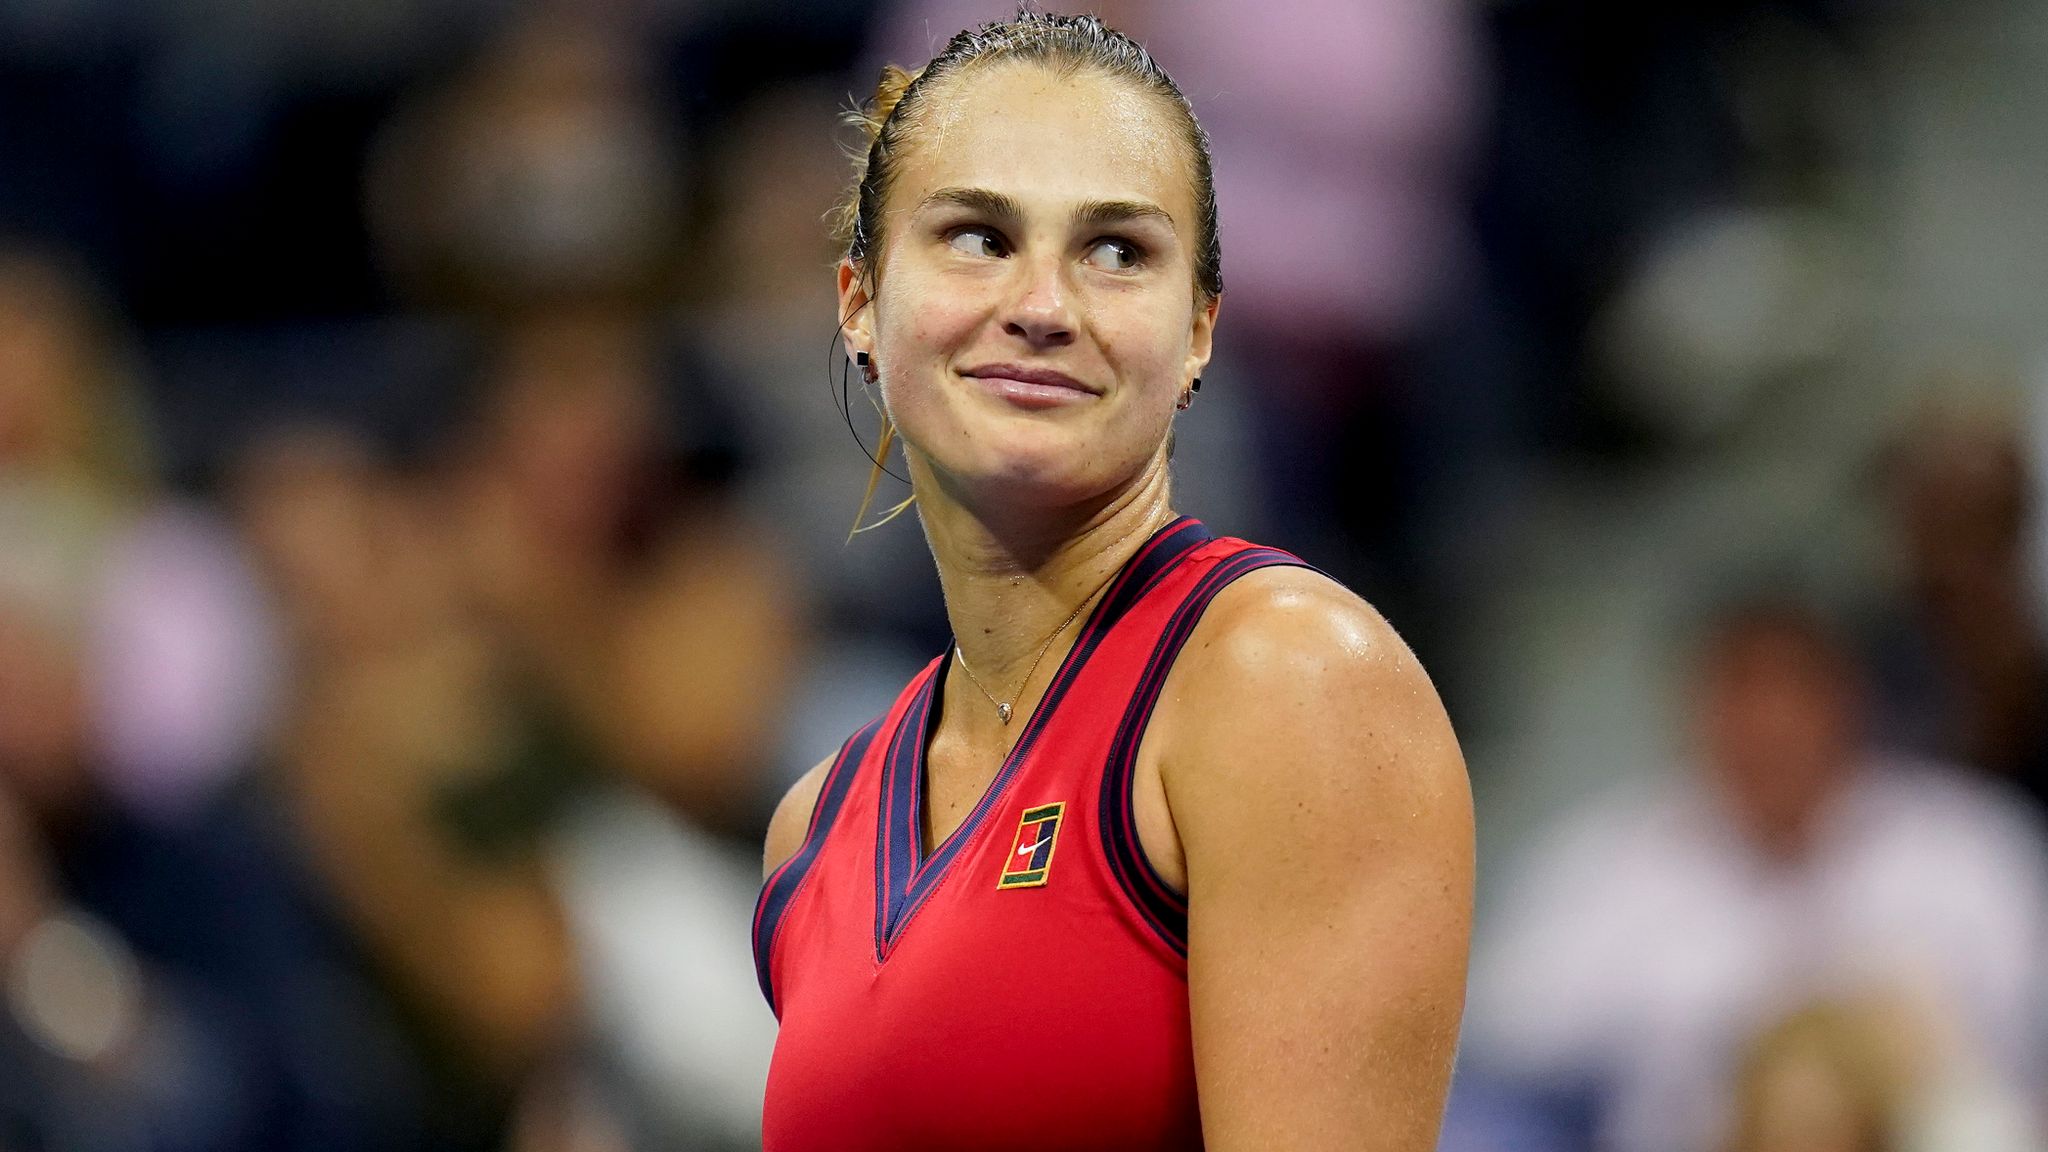 Aryna Sabalenka out of BNP Paribas Open in Indian Wells after positive COVID-19 test Tennis News Sky Sports